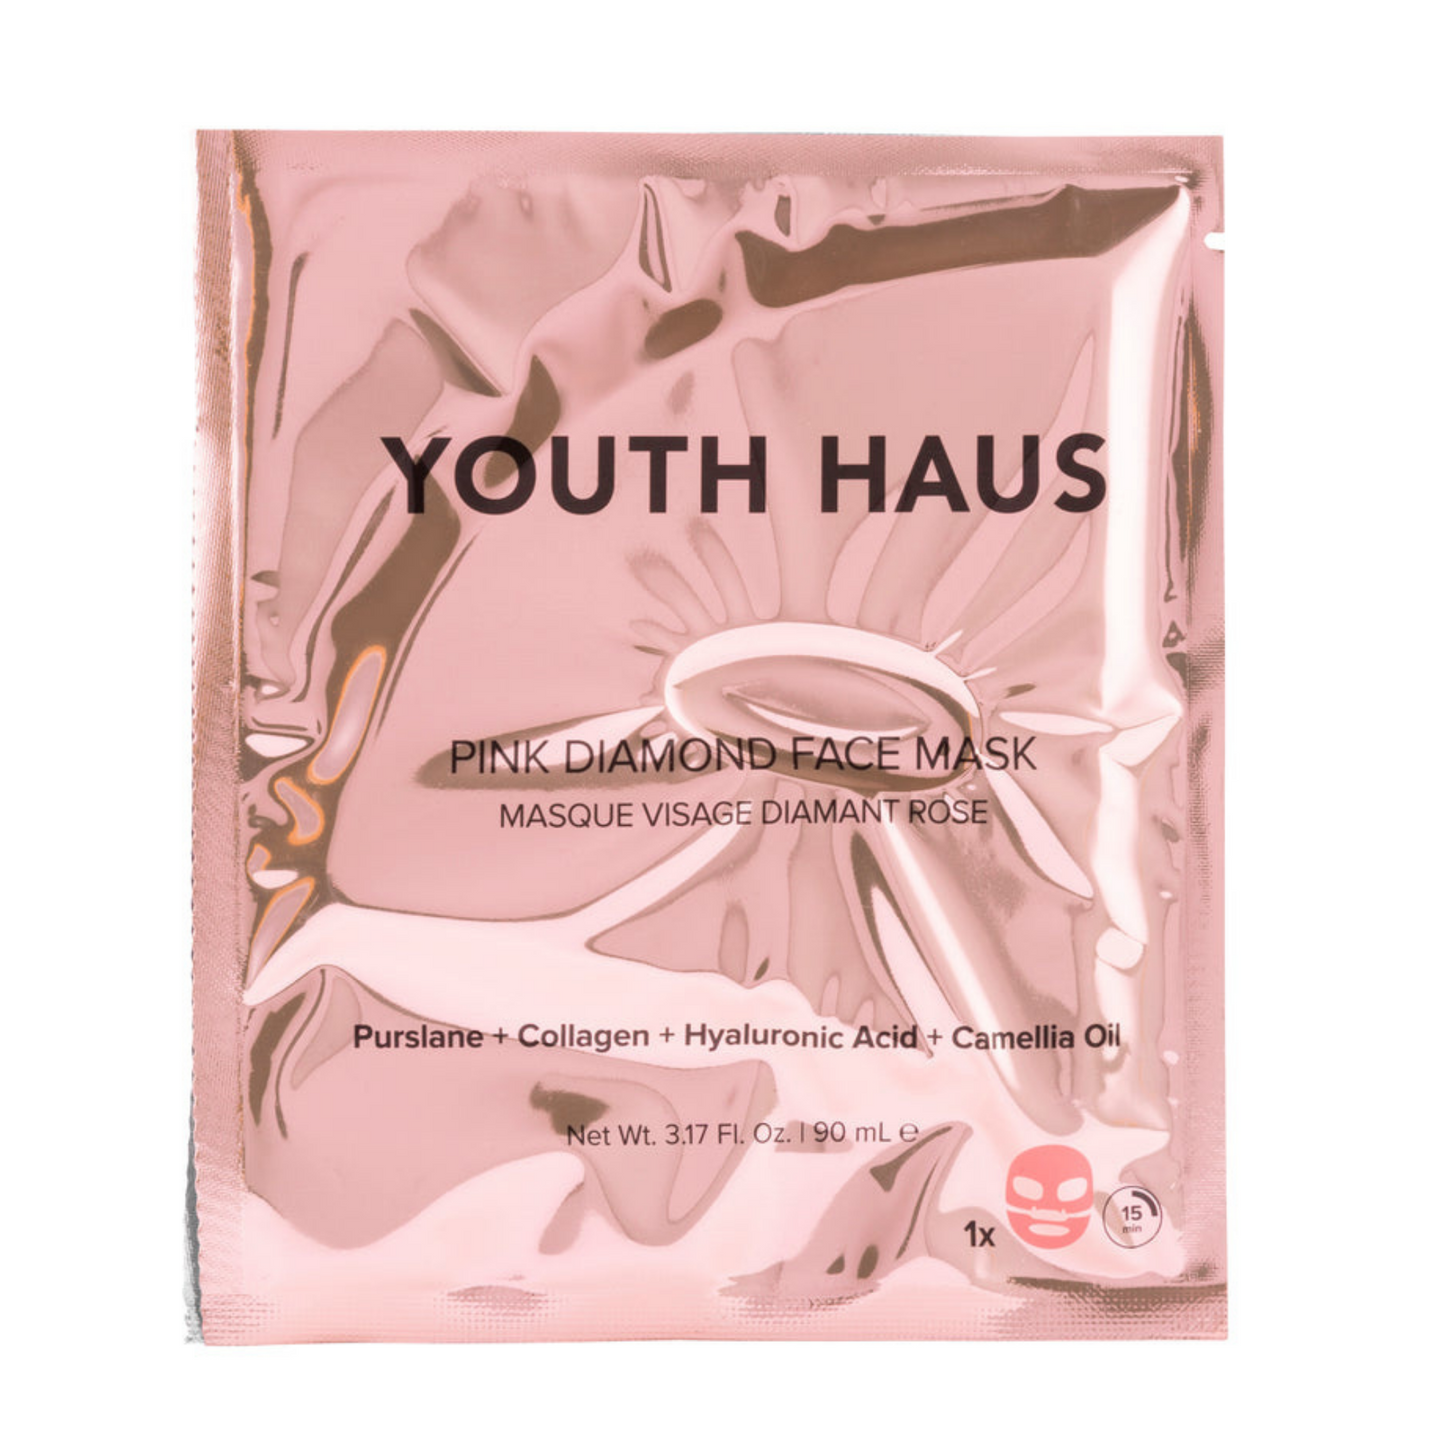 Primary Image of Youth Haus Pink Diamond Face Mask